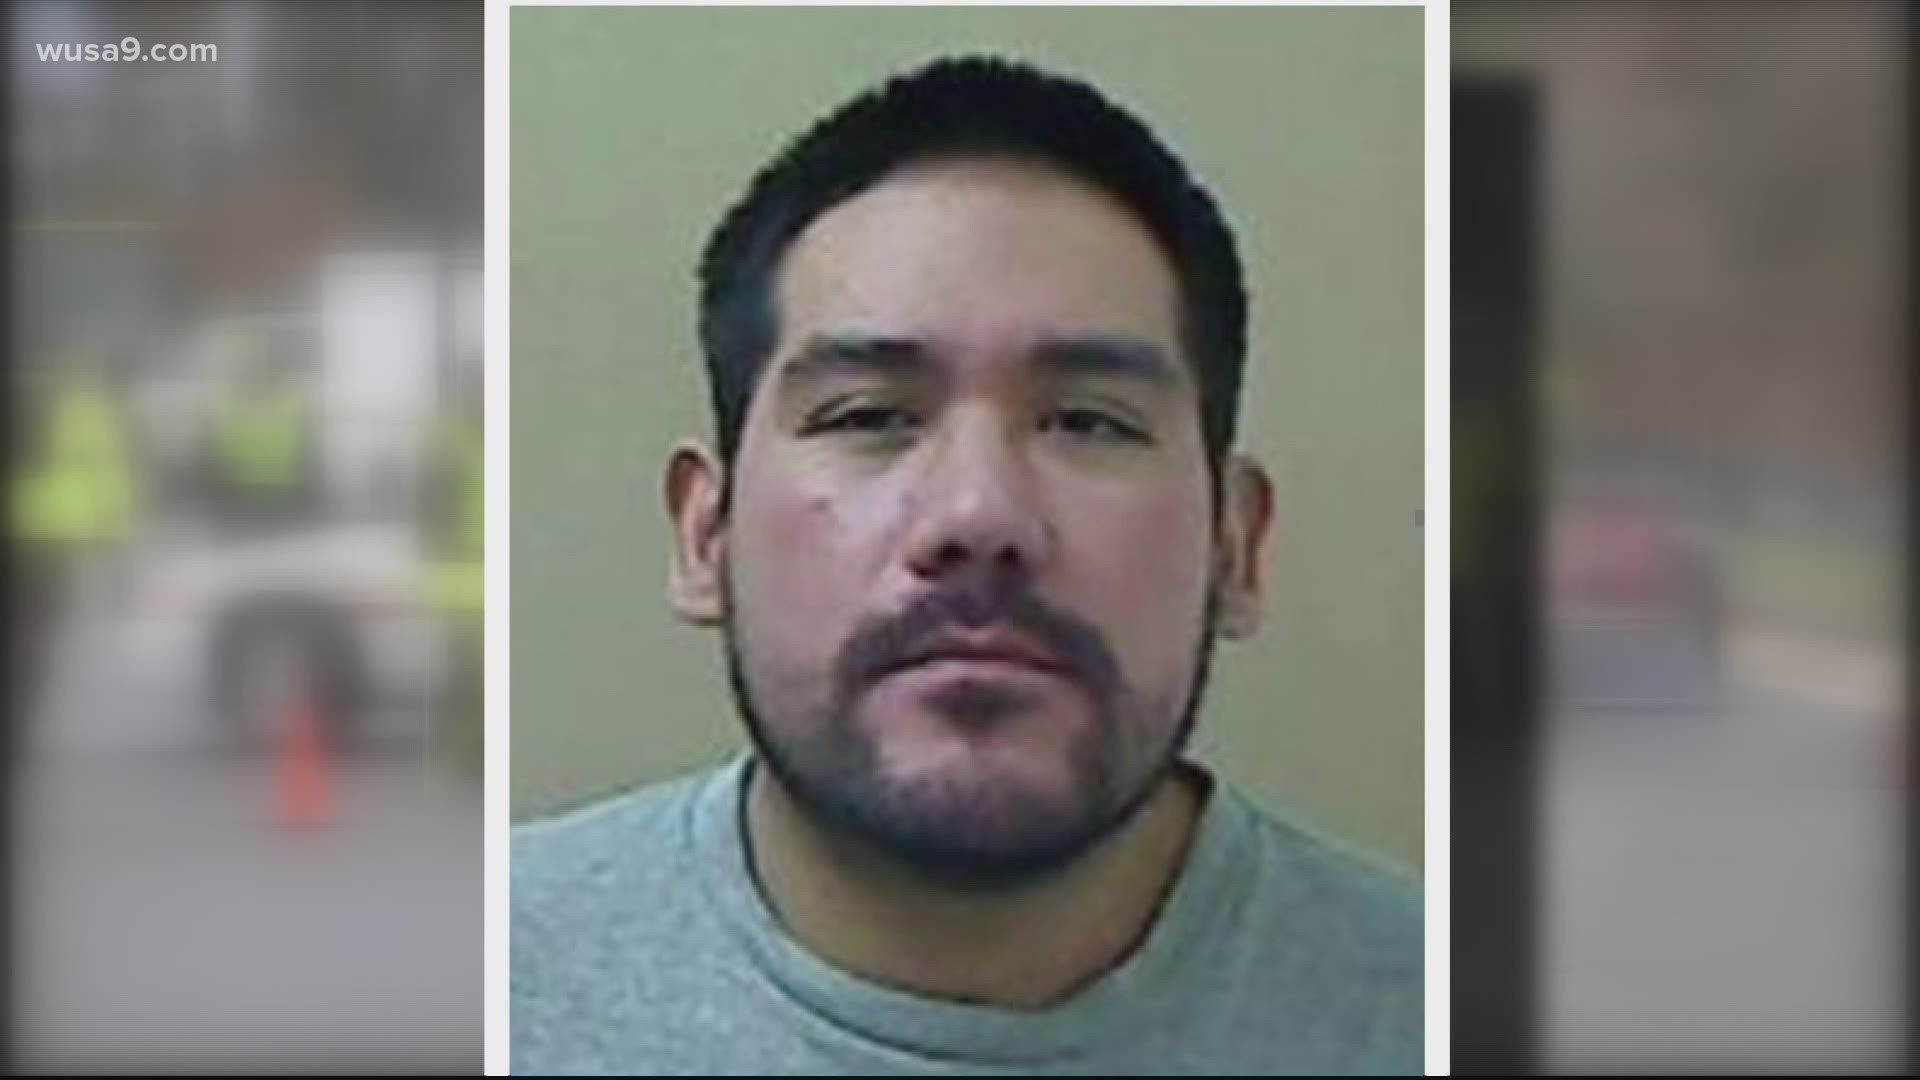 Loudoun County deputies are traveling to North Carolina to take custody of Ronald Roldan, who has been serving time there for attacking another woman.